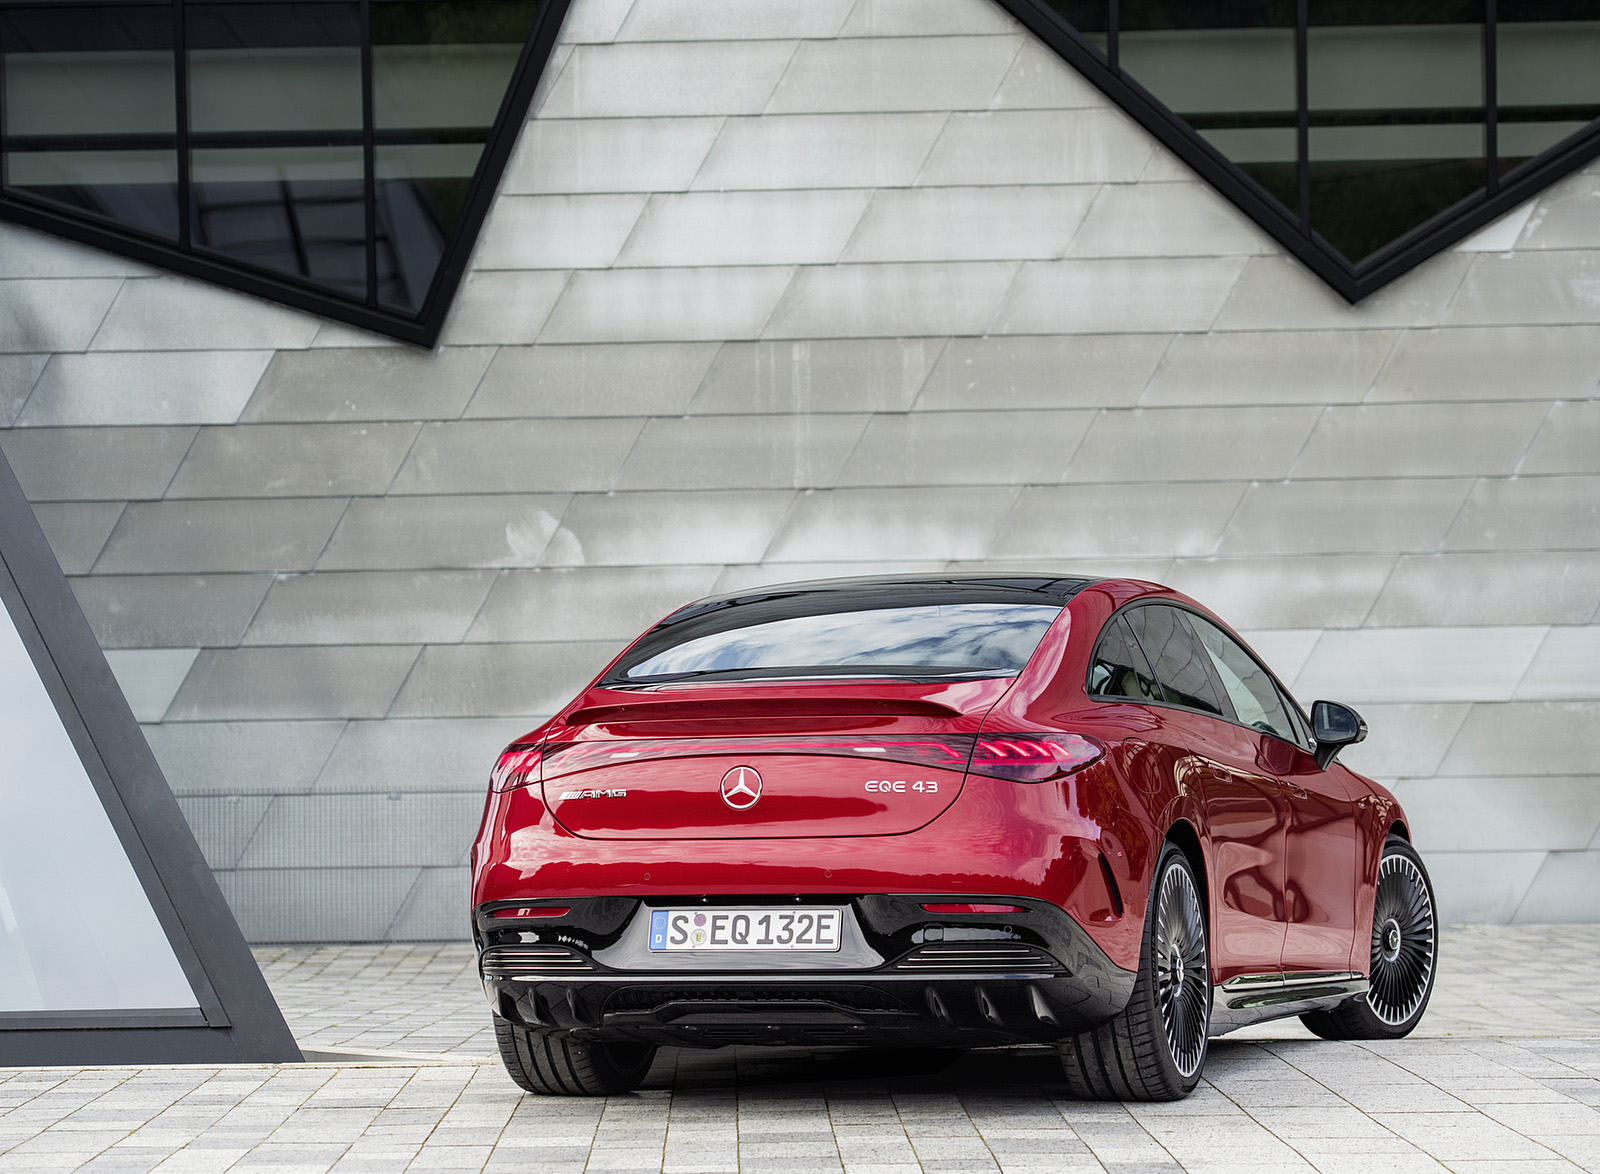 2023 Mercedes-AMG EQE 43 4MATIC (Color: MANUFAKTUR hyacinth red) Rear Three-Quarter Wallpapers  #21 of 241